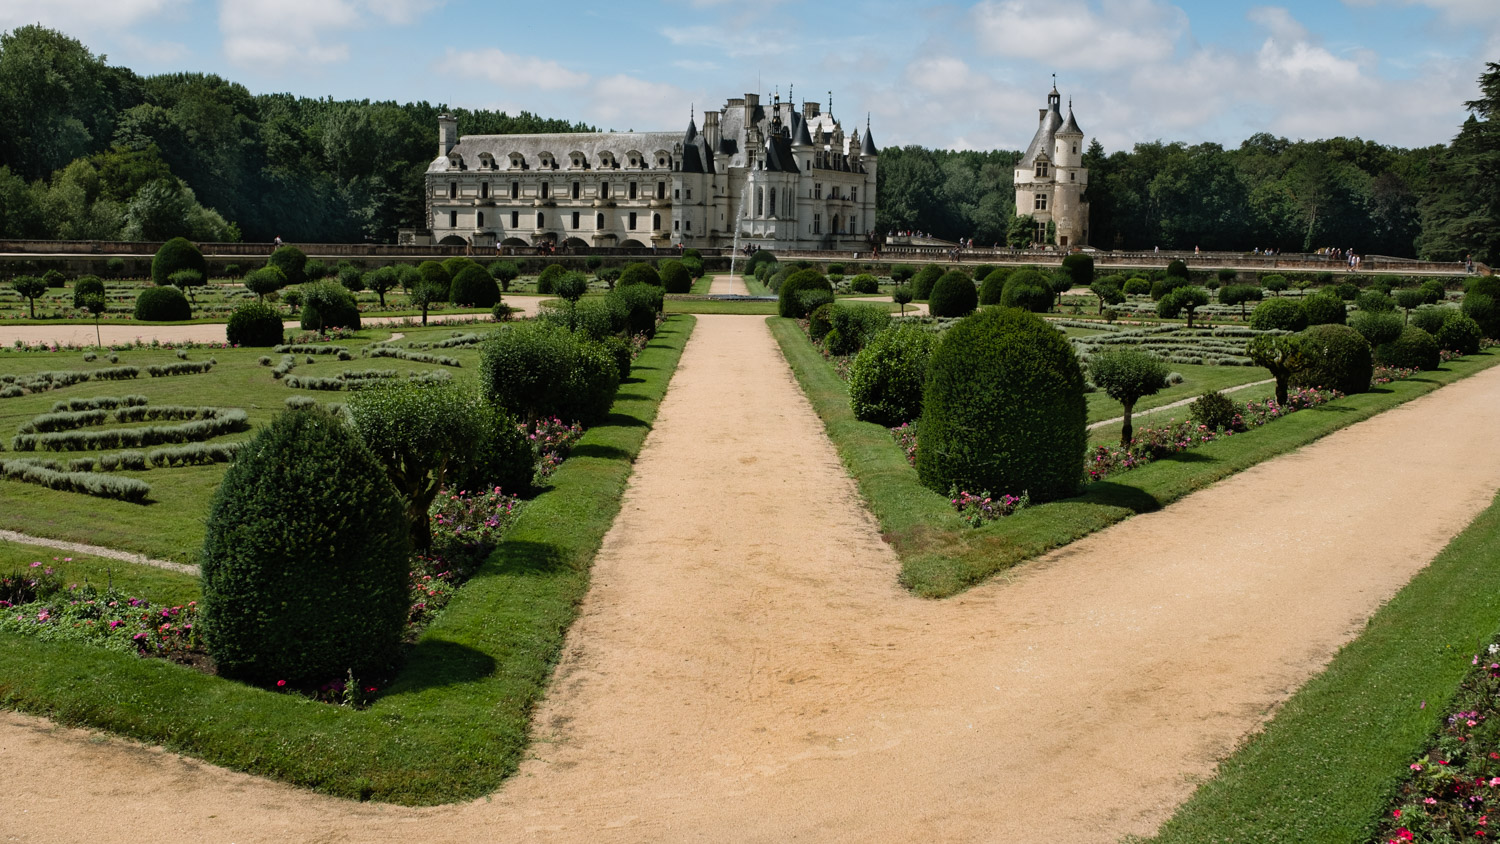 The French gardens of Chenonceau - Travel photography and guide by © Natasha Lequepeys for "And Then I Met Yoko". #loirevalley #france #travelguide #travelphotography #valdeloire 